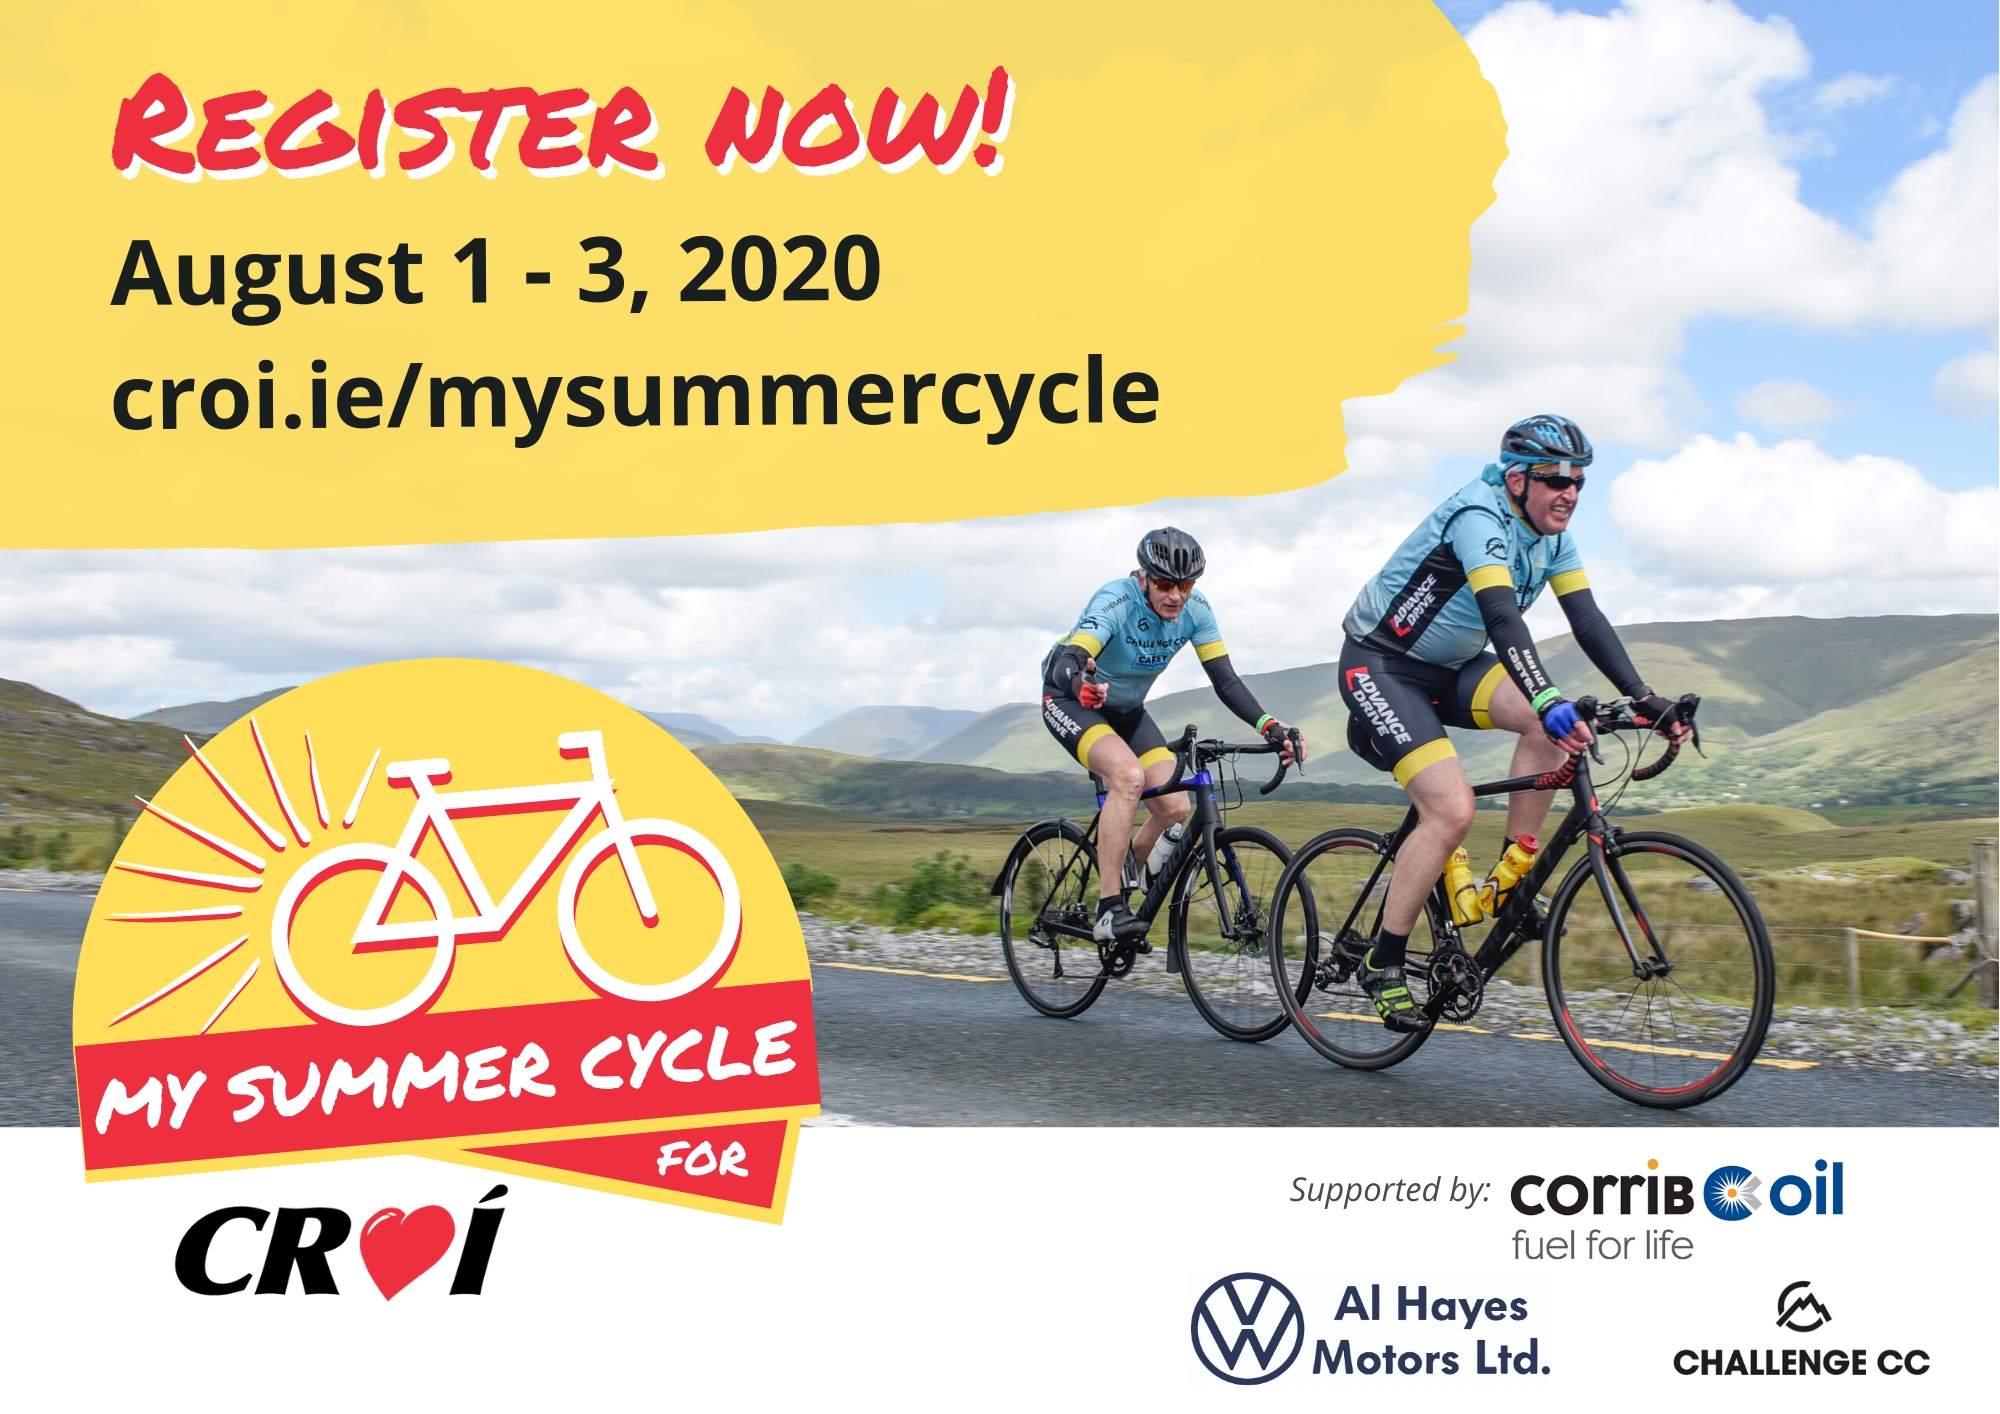 My Summer Cycle For Croí, Galway, Ireland